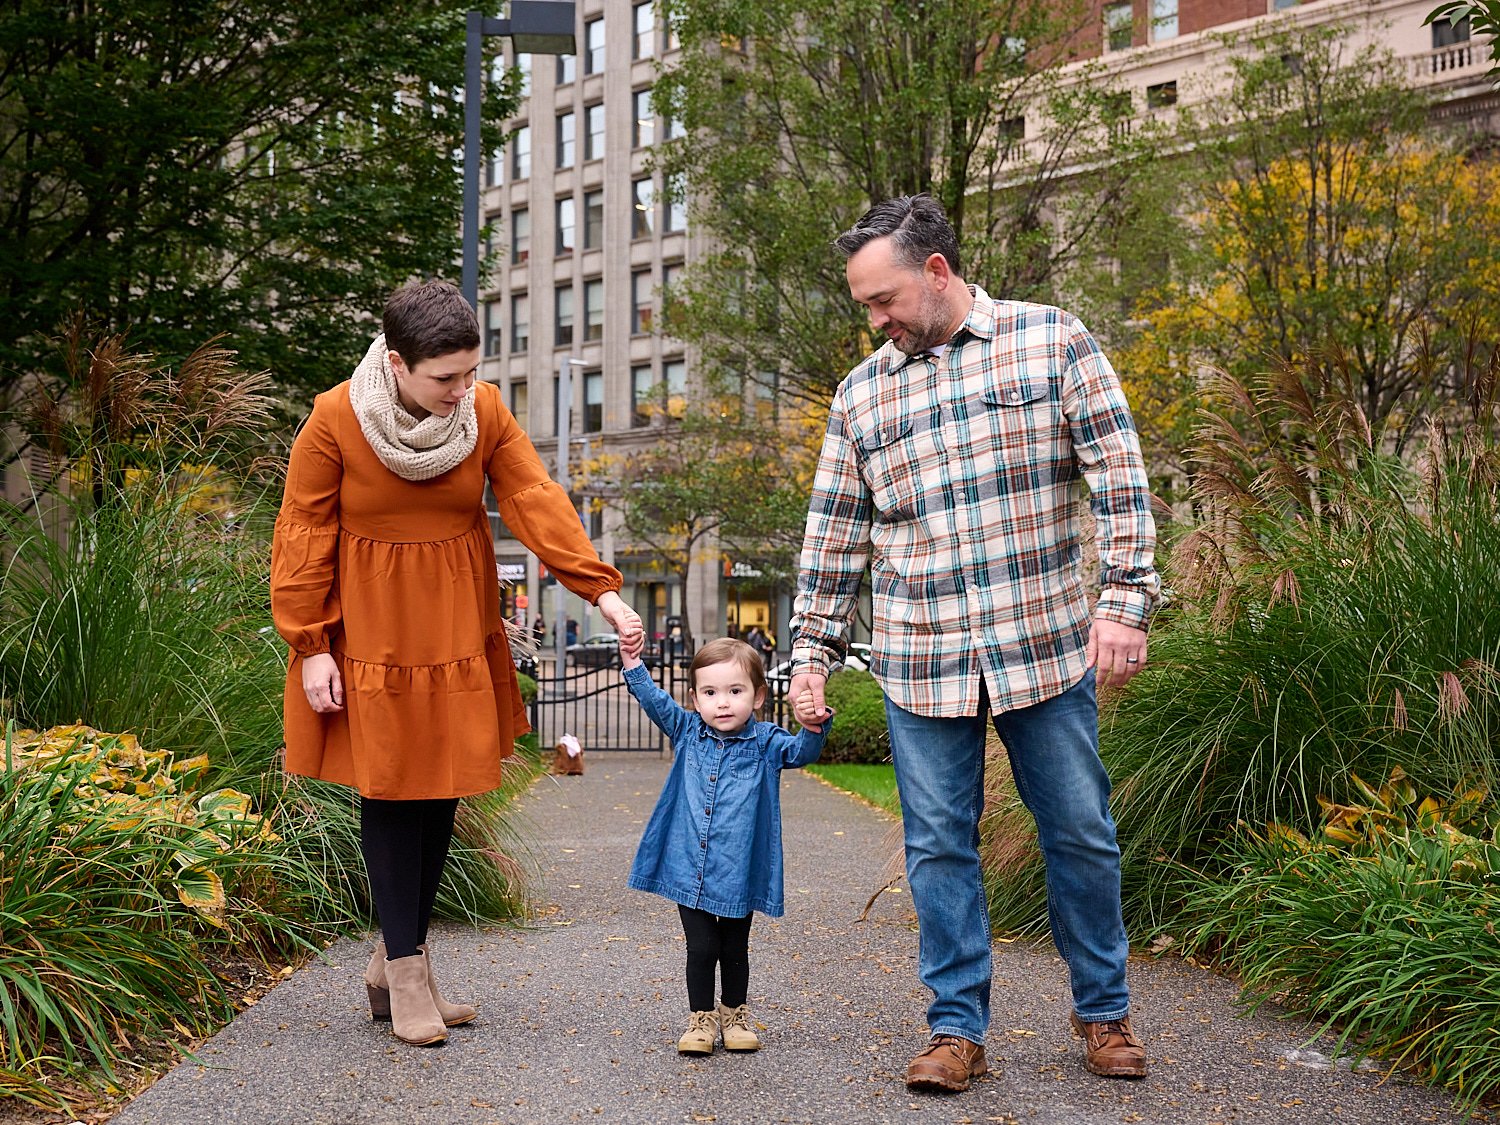  Amanda Norris is posing for a family photoshoot with her husband and her two-year-old daughter in city square of Pittsburgh Downtown, Western Pennsylvania. Amanda is pregnant with her second child. 